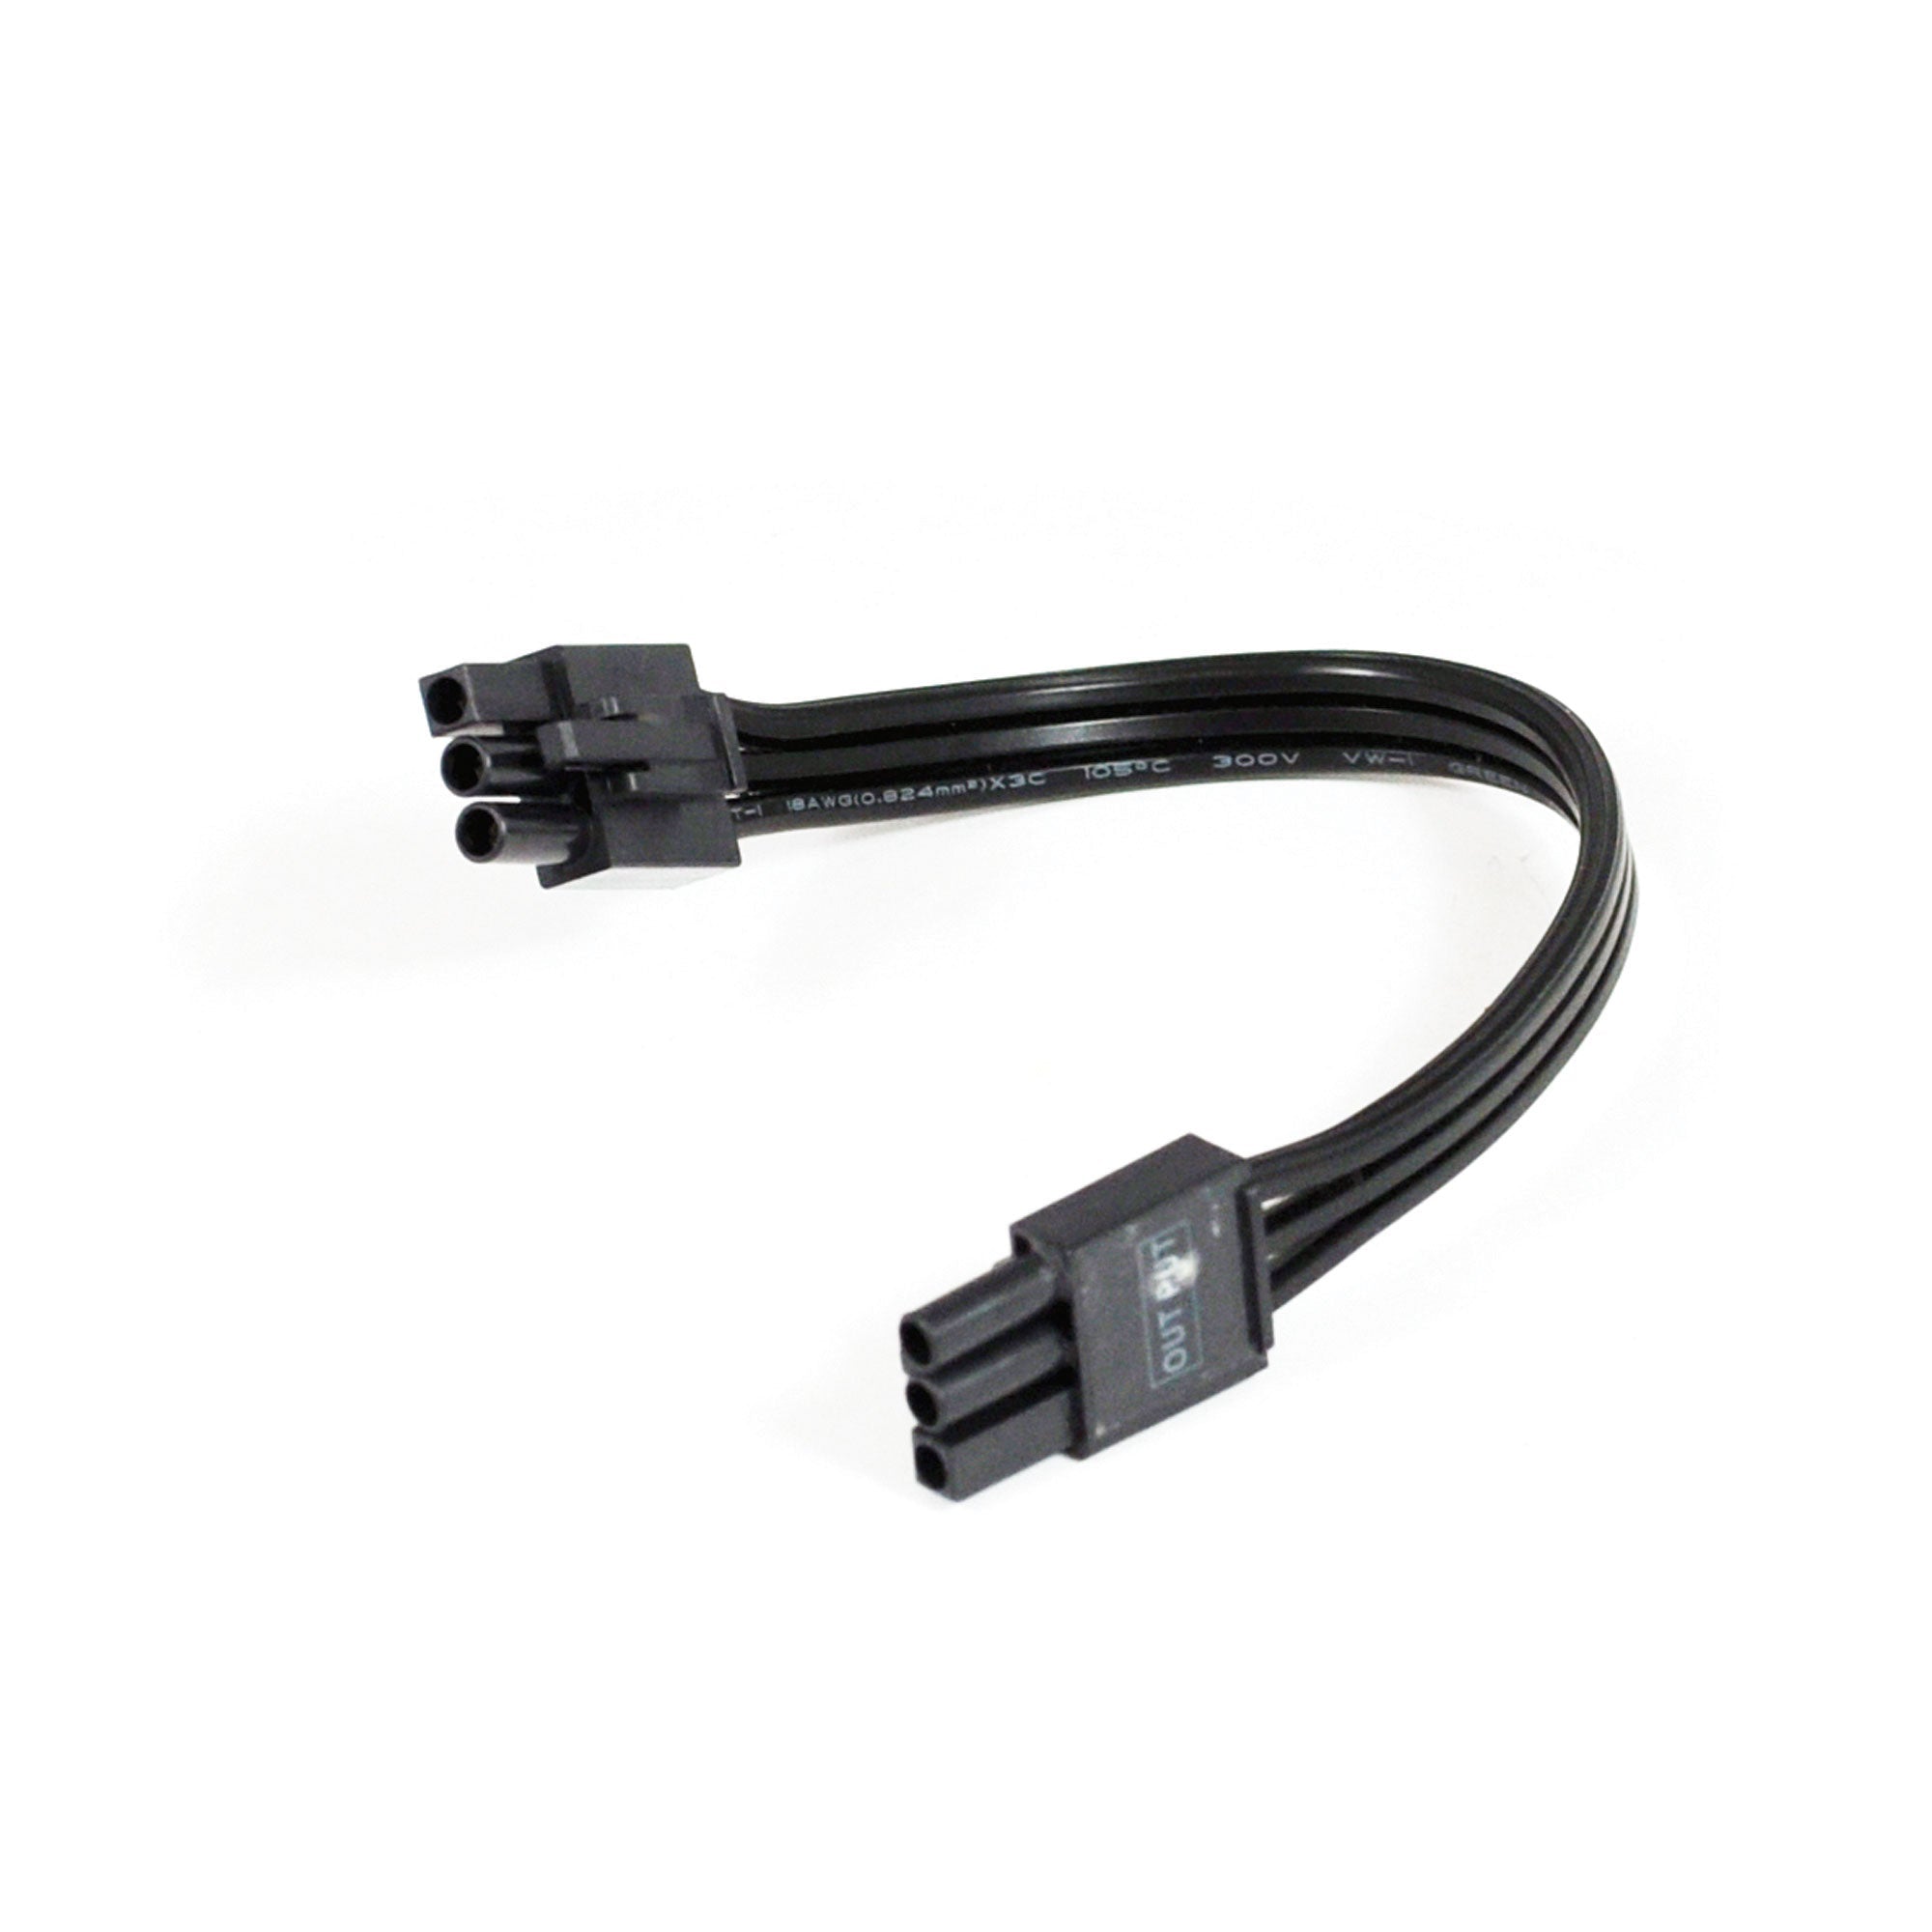 Nora Lighting NUA-812B - Accent / Undercabinet - 12 Inch LEDUR Interconnect Cable, Black